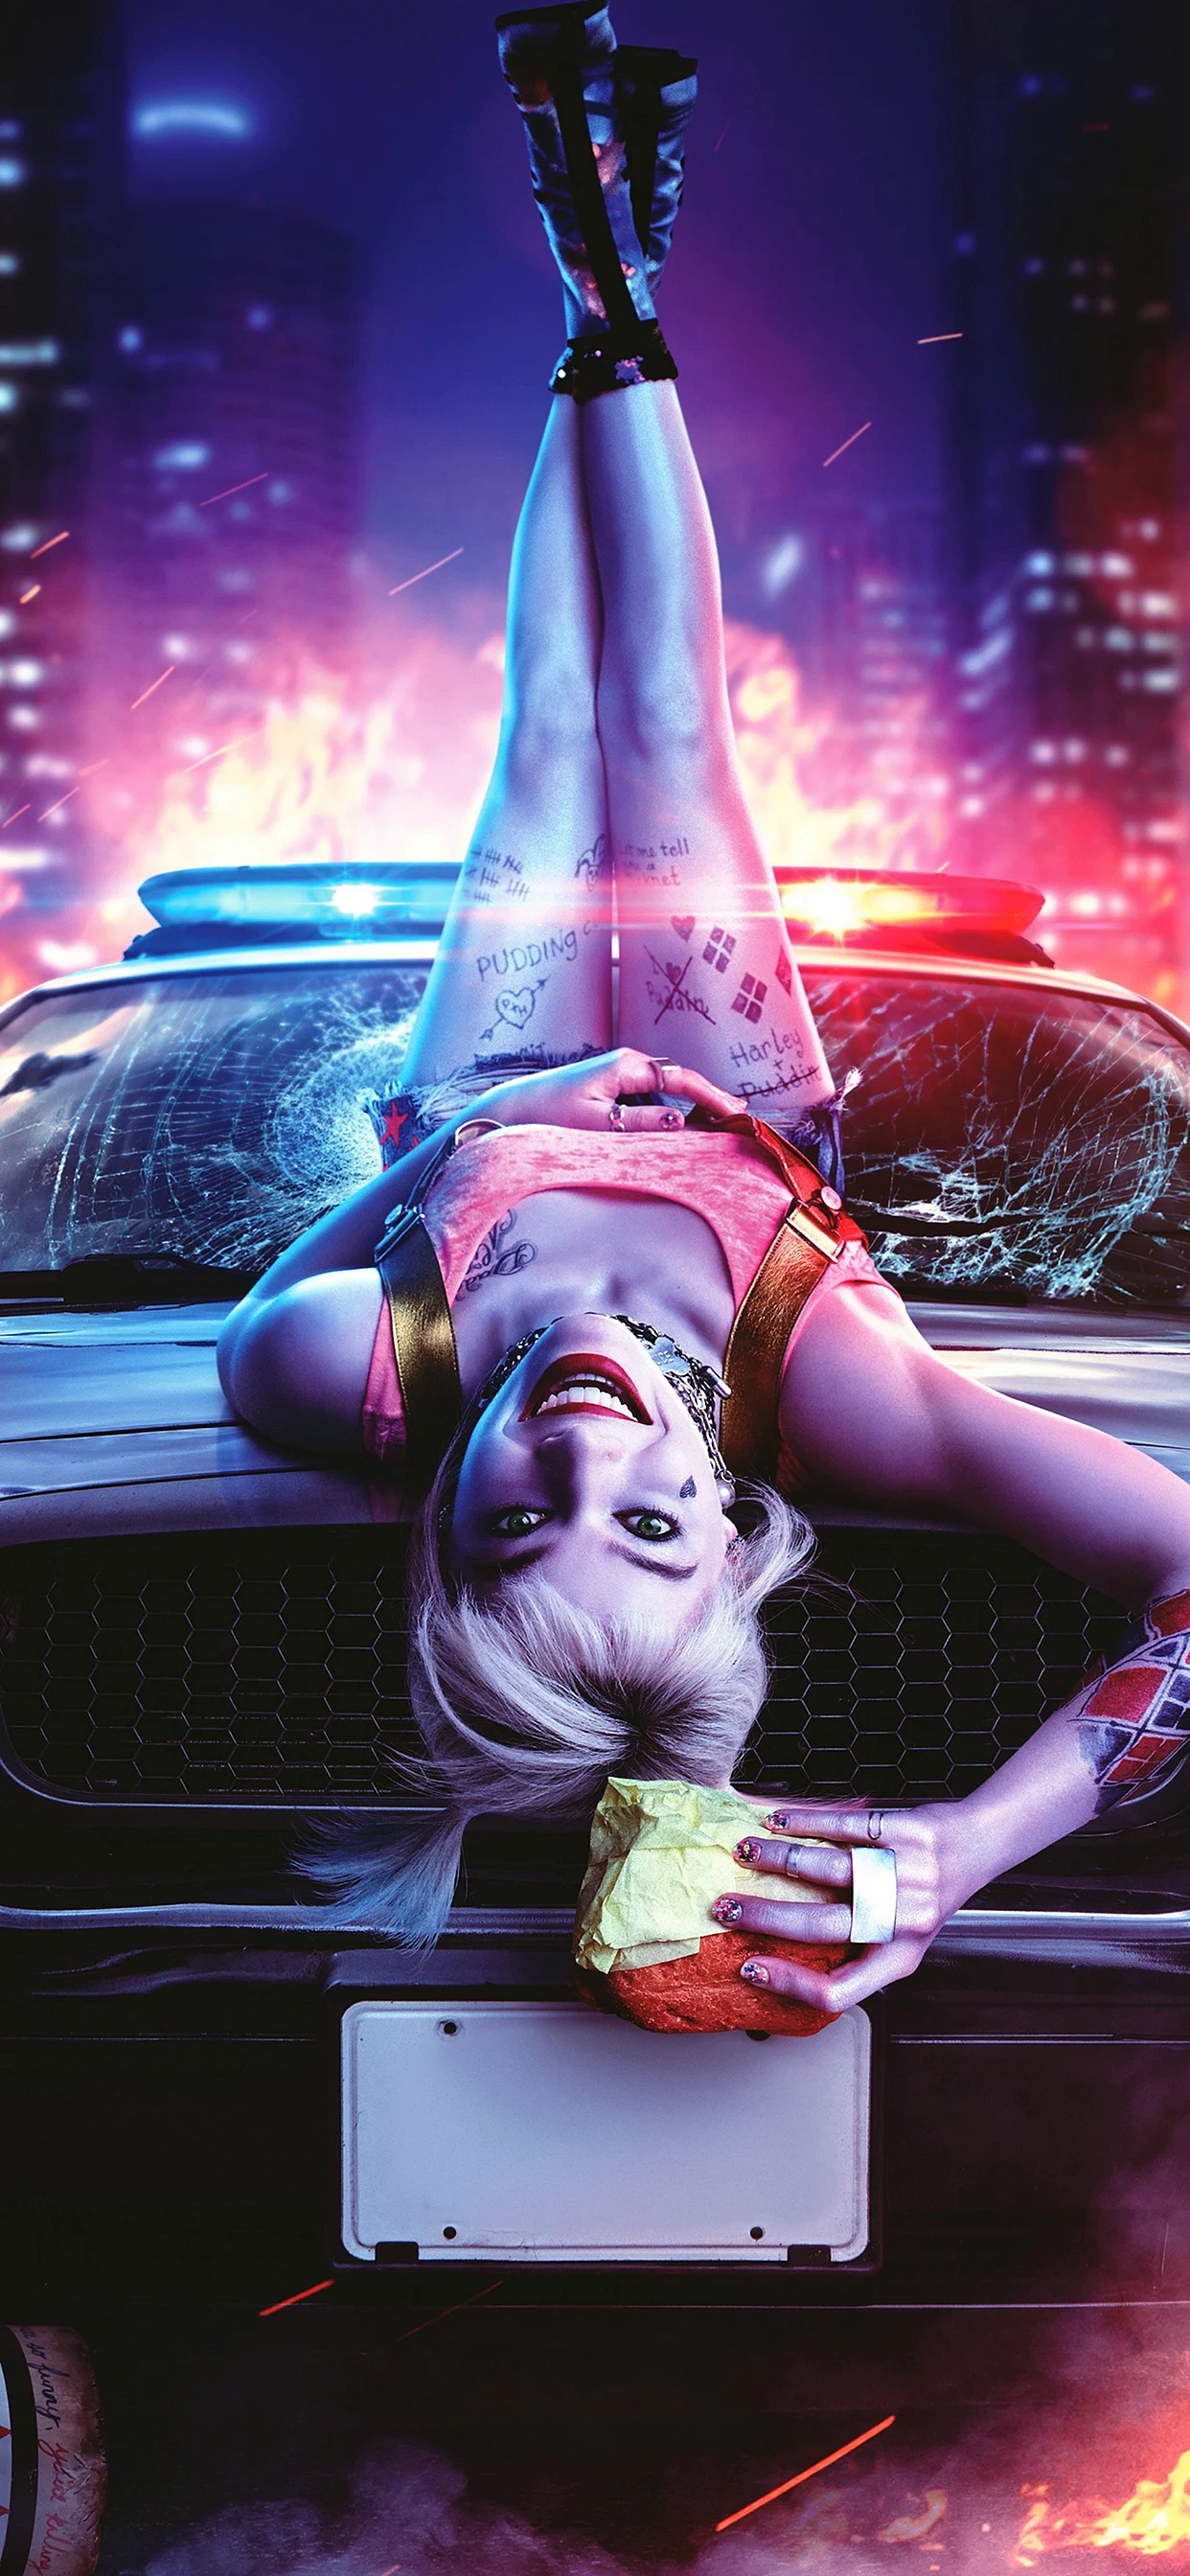 Harley Quinn Wallpaper for iPhone 11 Pro Max